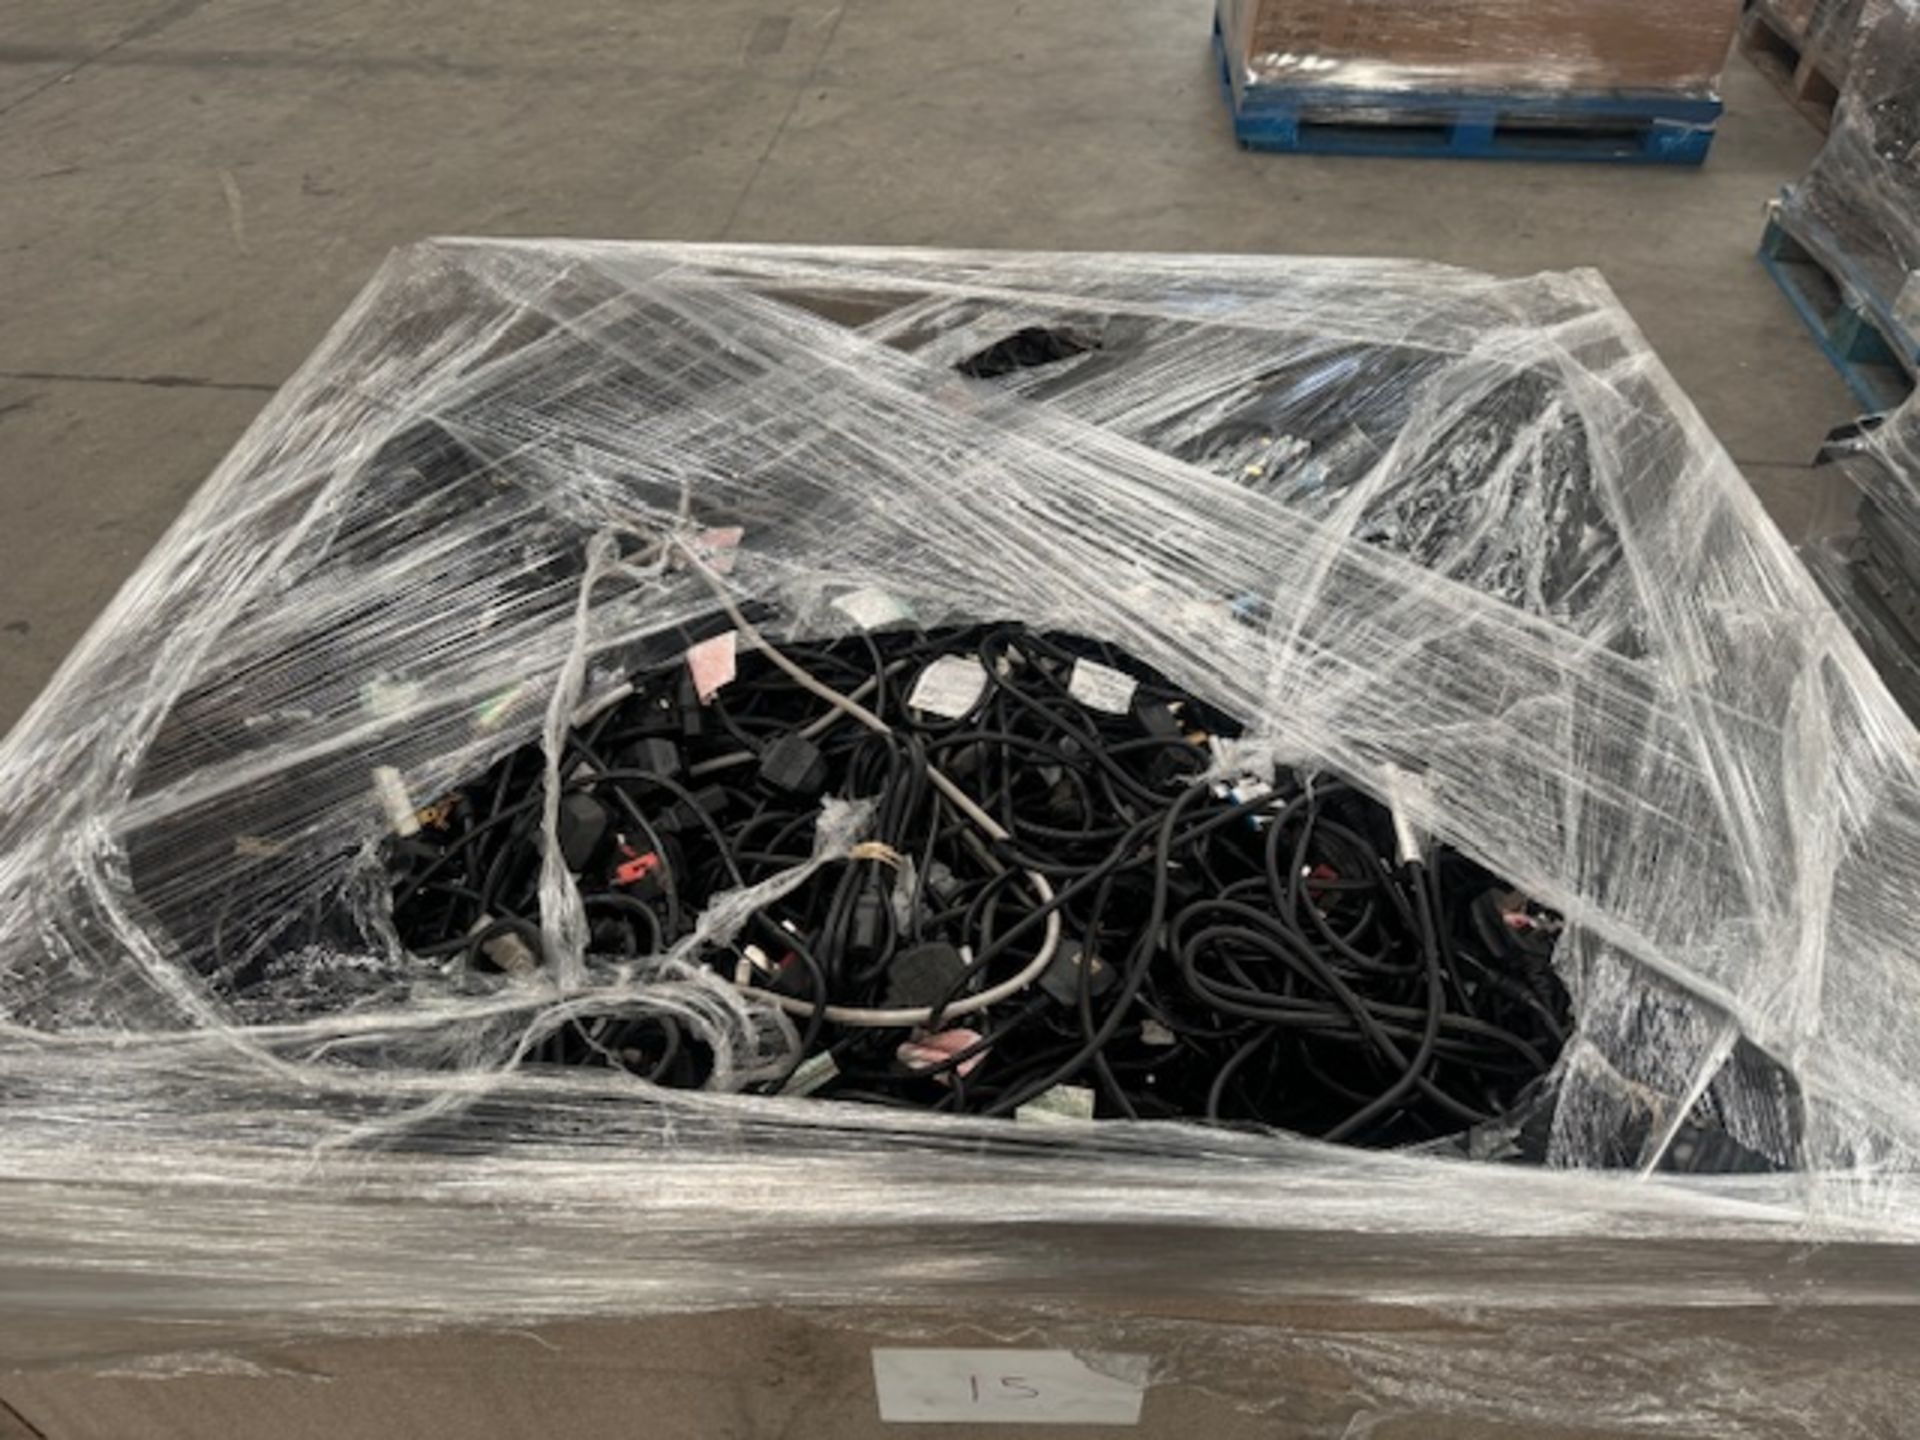 IT PALLET LOT INCLUDING A VERY LARGE VOLUME OF SPARE LAPTOP/PC POWER CABLES IN VARIOUS BRANDS AND - Image 3 of 3